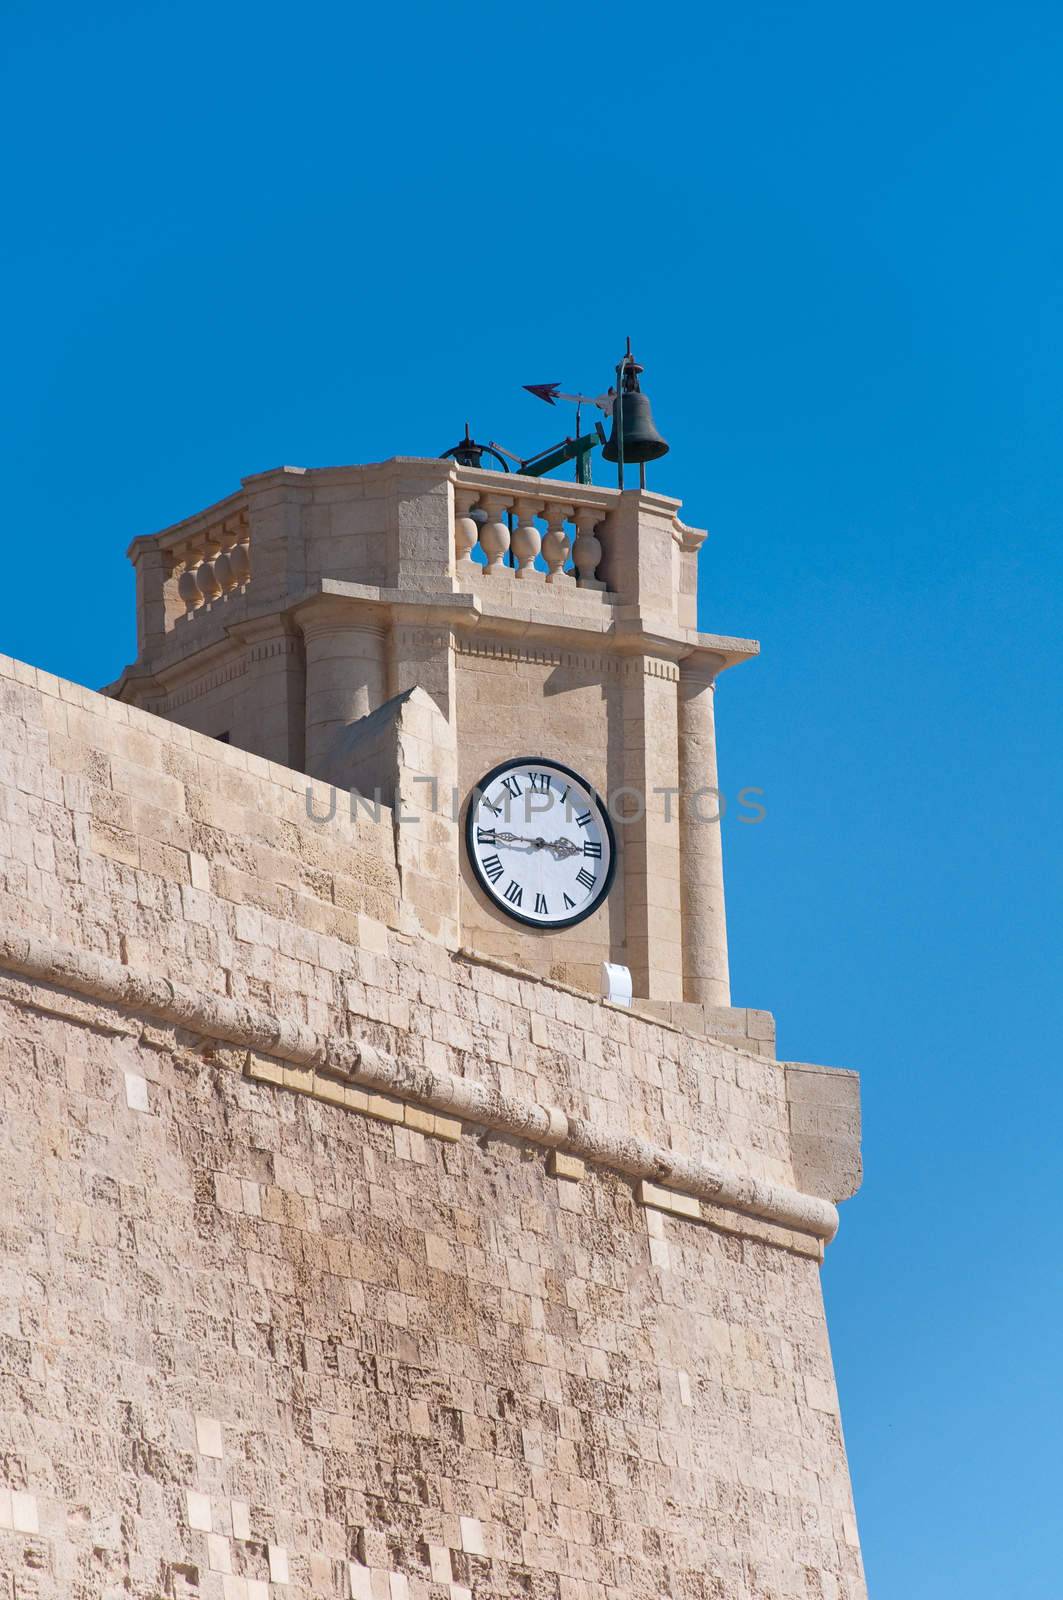 The walls of the fortress of Victoria, Rabat, with the clock, Gozo, Malta